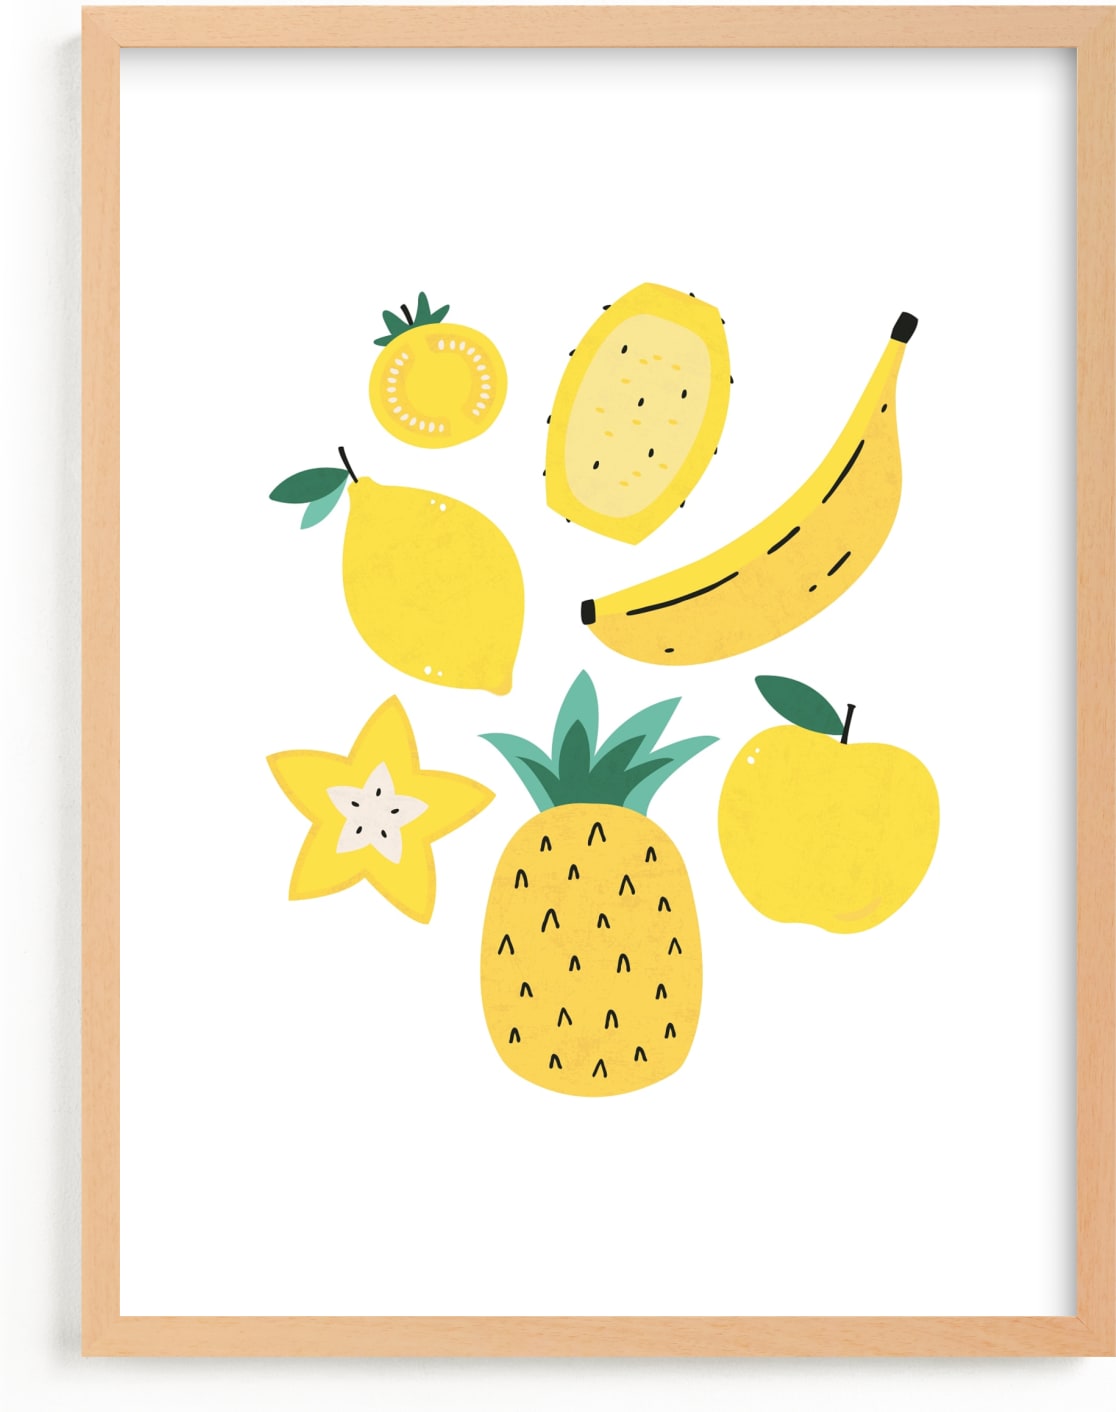 This is a white kids wall art by Erica Krystek called Monochrome Fruit No. 2.